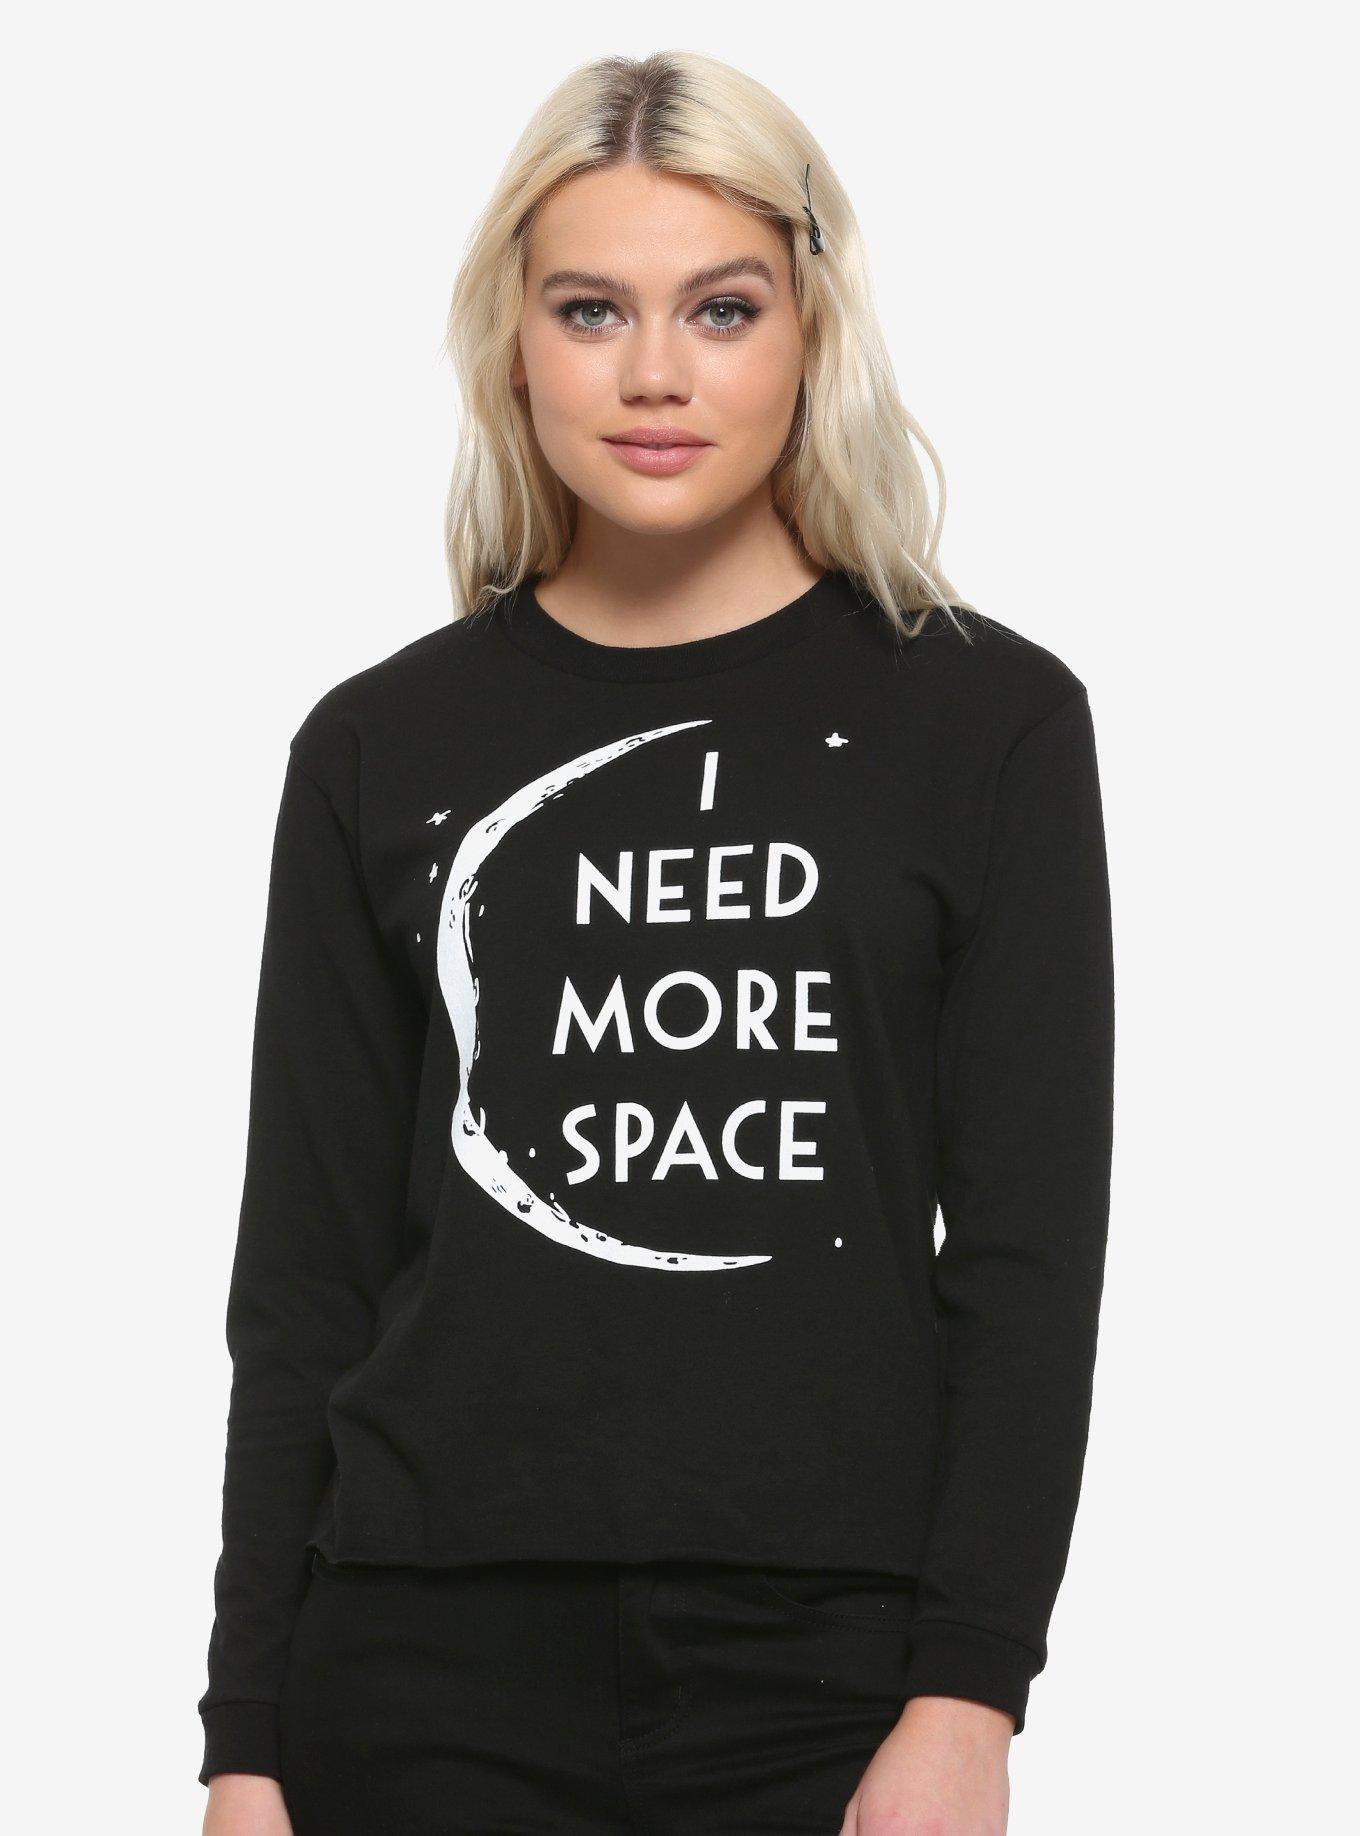 I Need More Space Girls Long-Sleeve T-Shirt, WHITE, hi-res